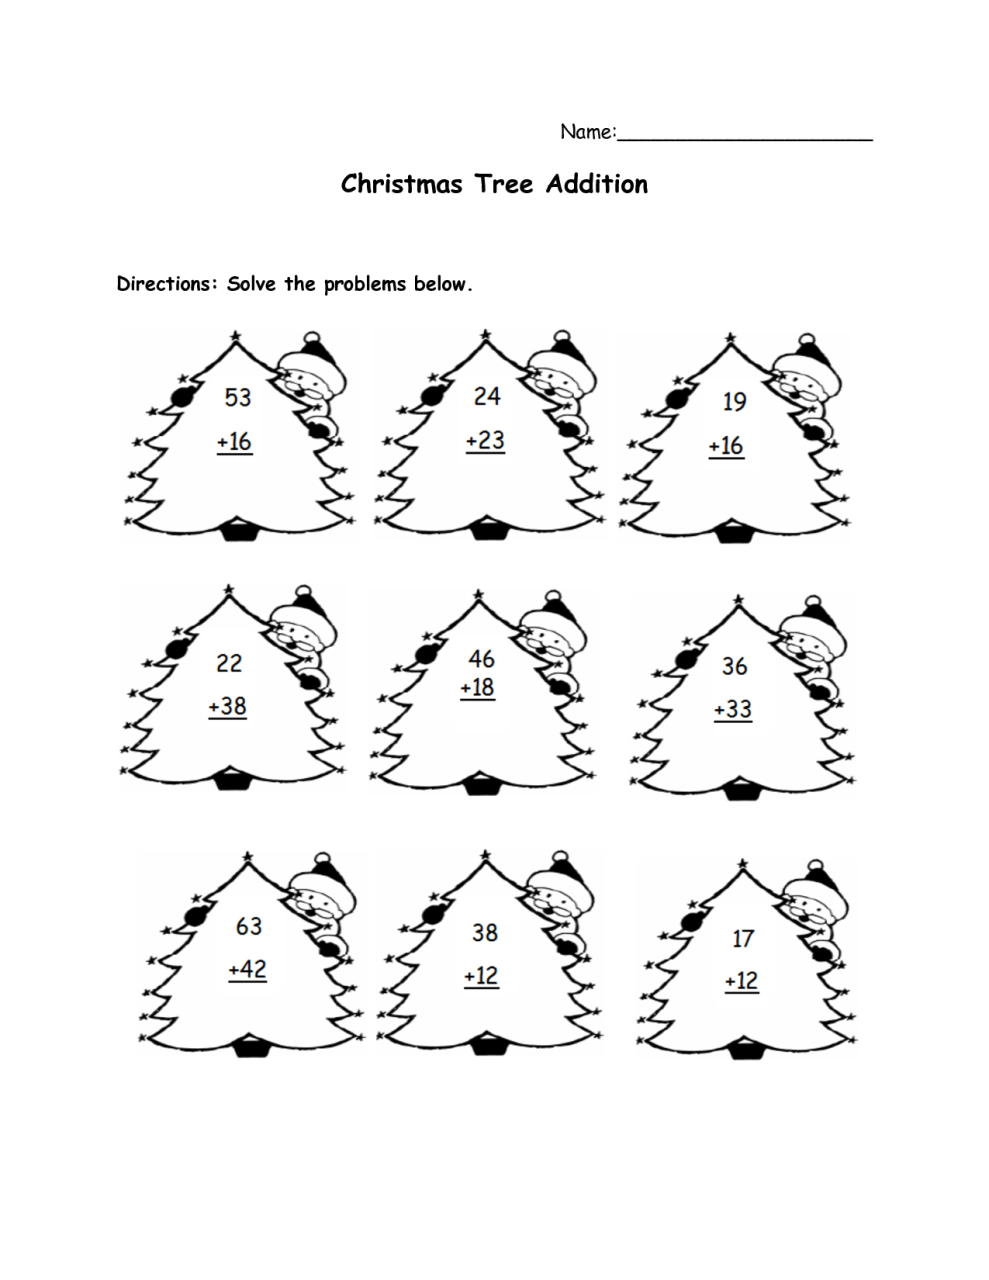 11 Best Images of Christmas Tree Addition Worksheet Free Printable